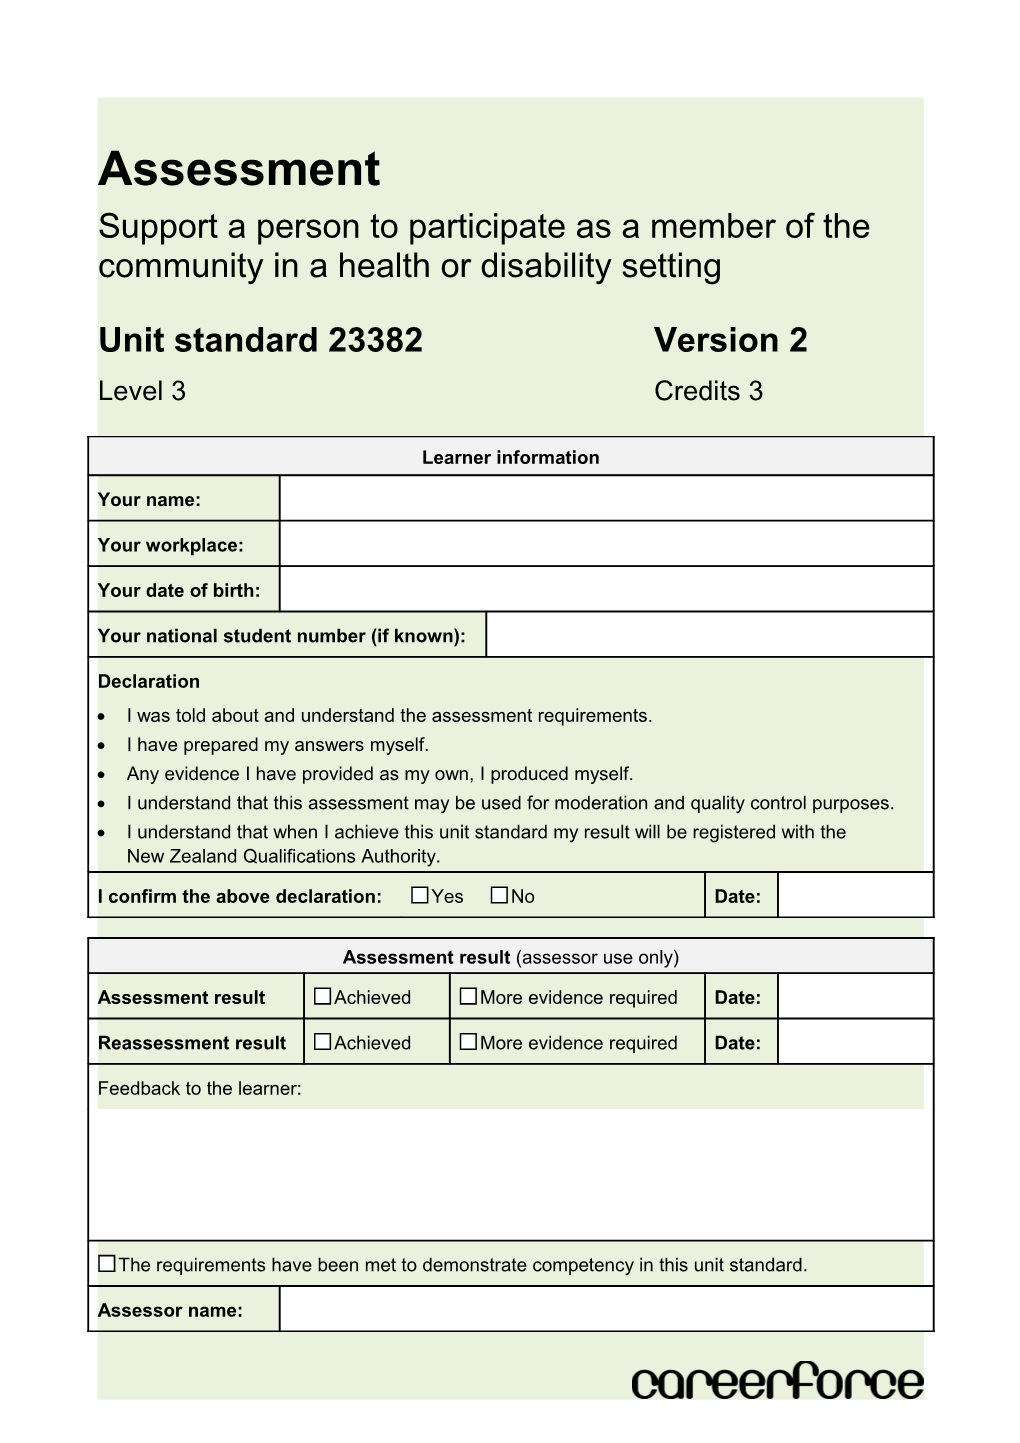 Support a Person to Participate As a Member of the Community in a Health Or Disability Setting